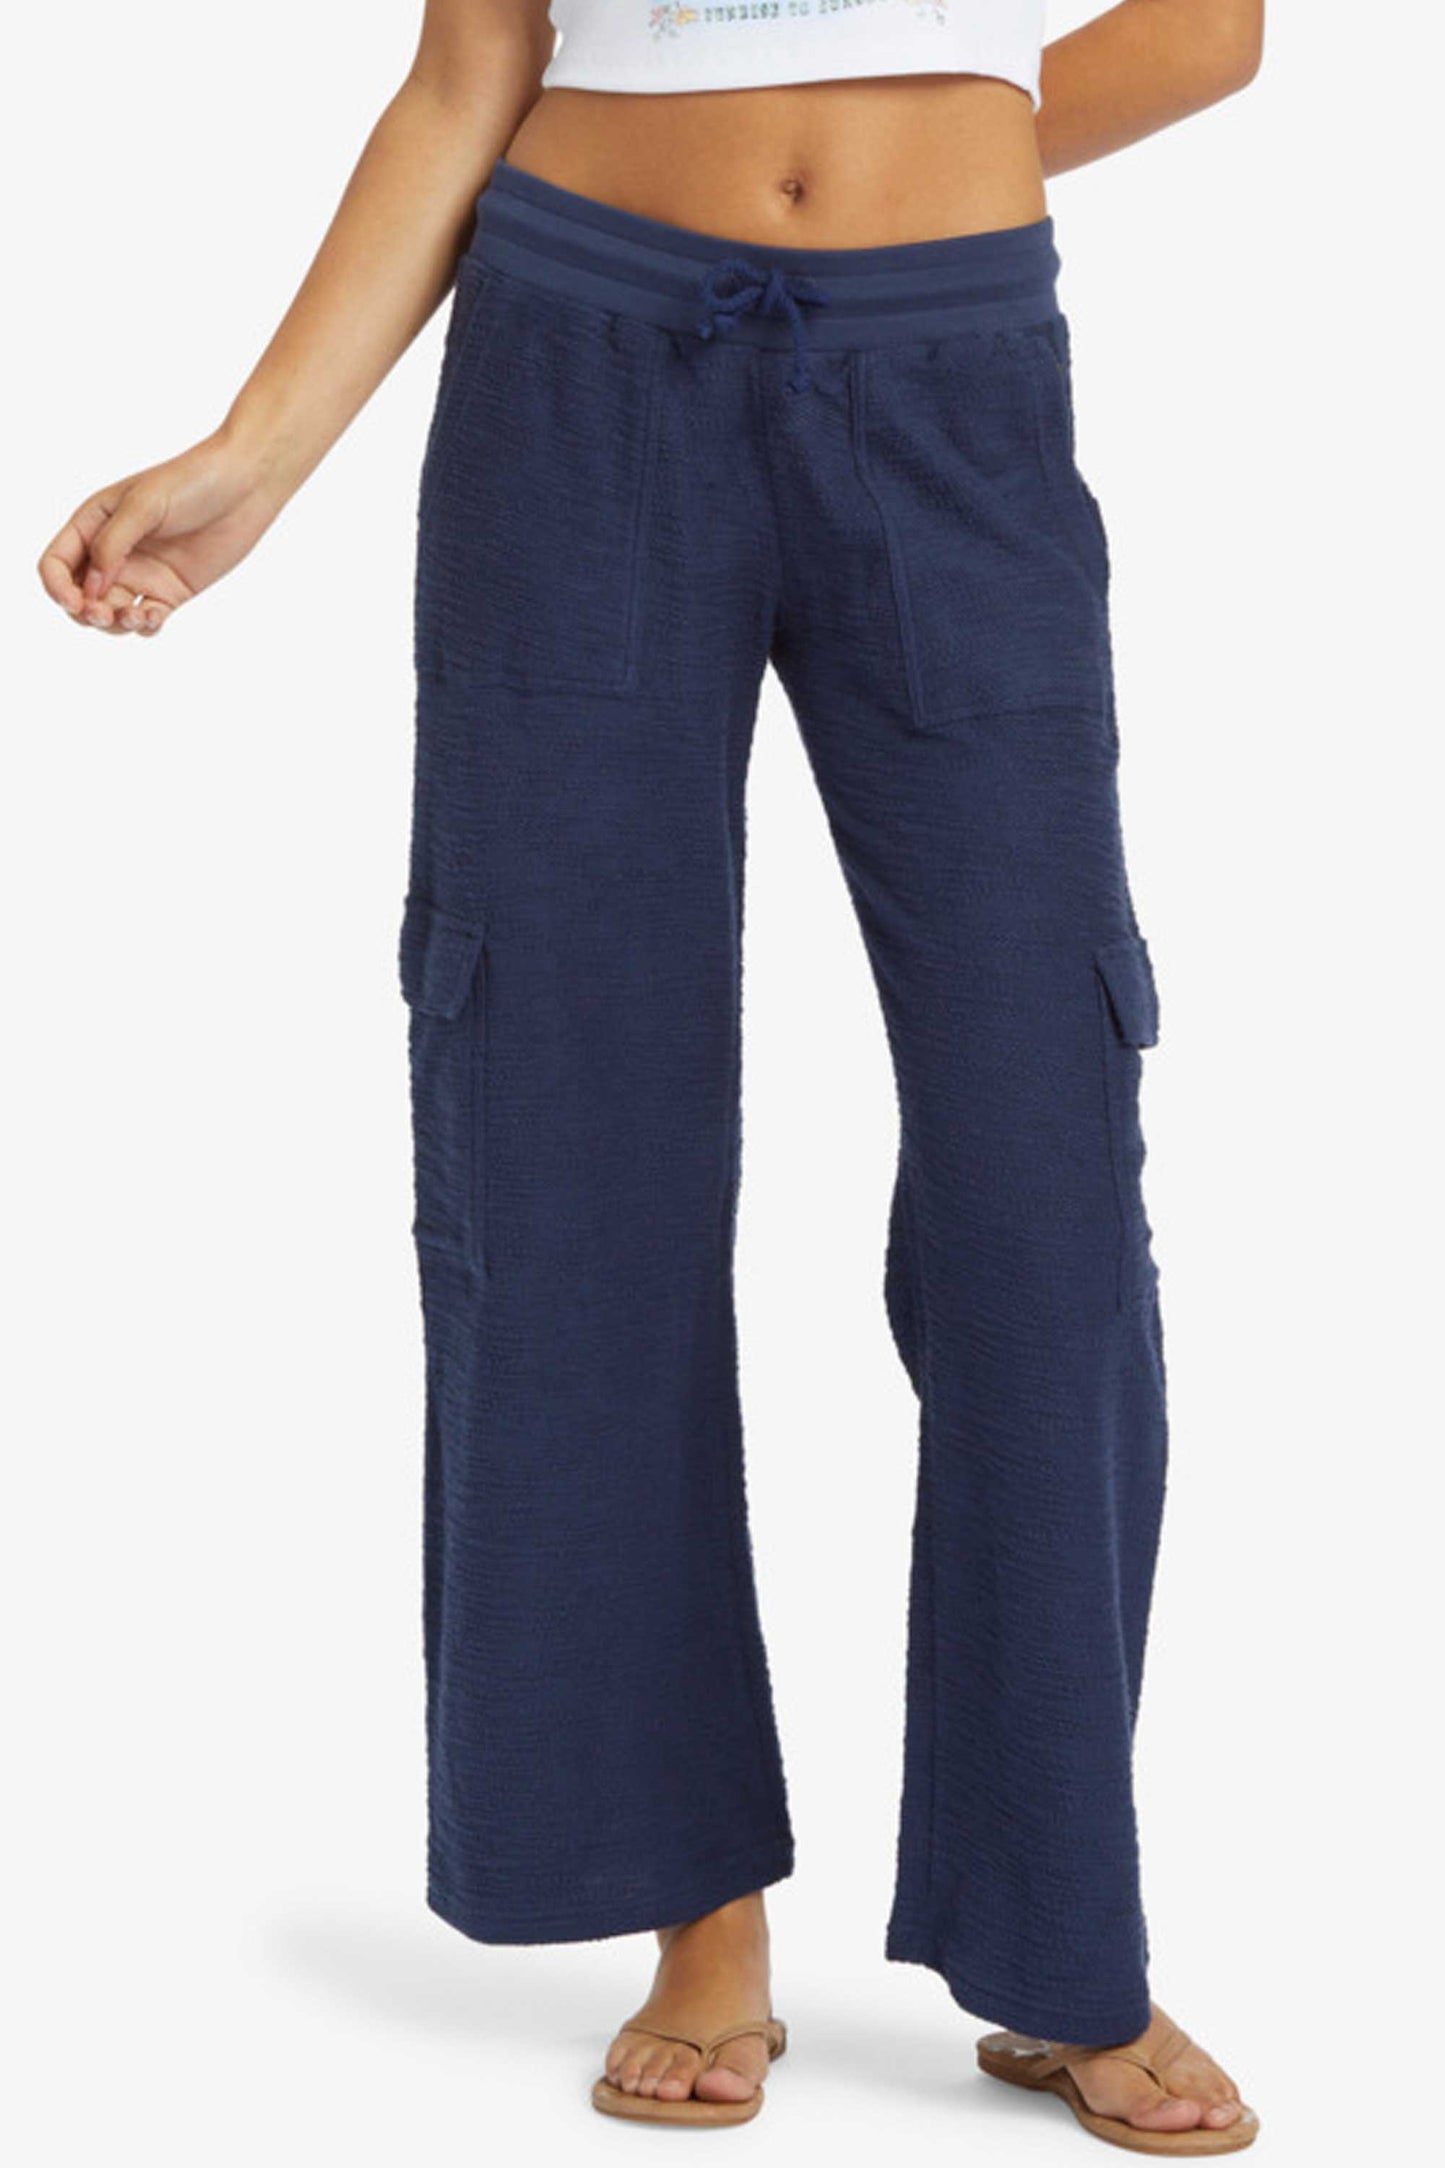 Pukas-Surf-Shop-roxy-woman-pant-off-the-hook-cargo-naval-academy